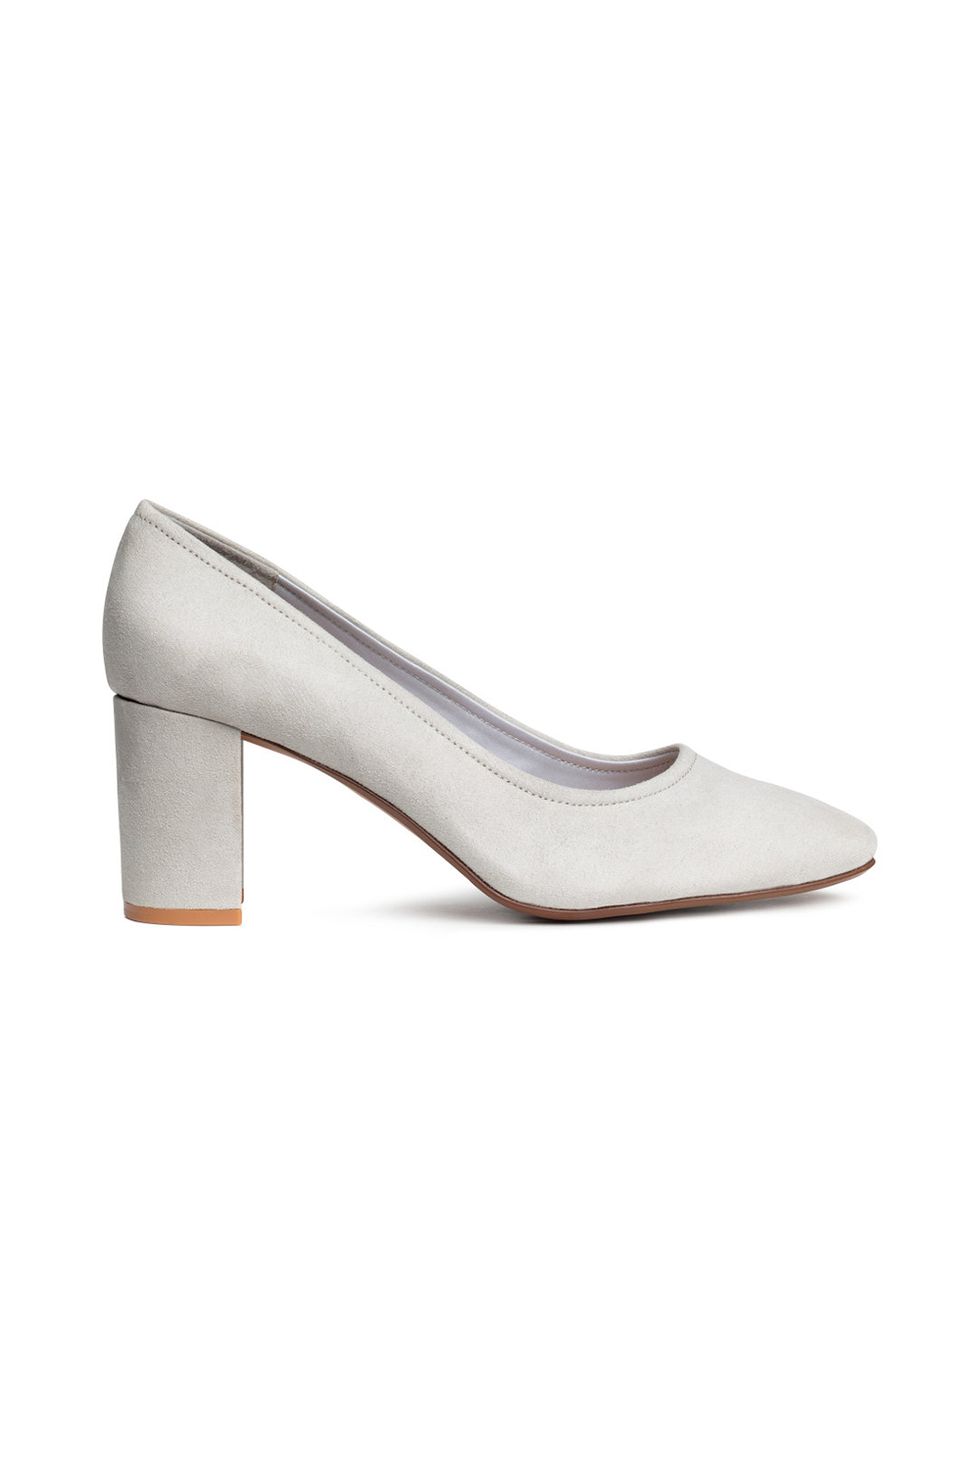 <p>Simple, chic, and under $25. Any questions?</p><p>Block-heel pumps, $24.99; <a href="http://www.hm.com/us/product/63353?article=63353-B" target="_blank" data-tracking-id="recirc-text-link">hm.com</a><a href="http://www.hm.com/us/product/63353?article=63353-B"></a></p>